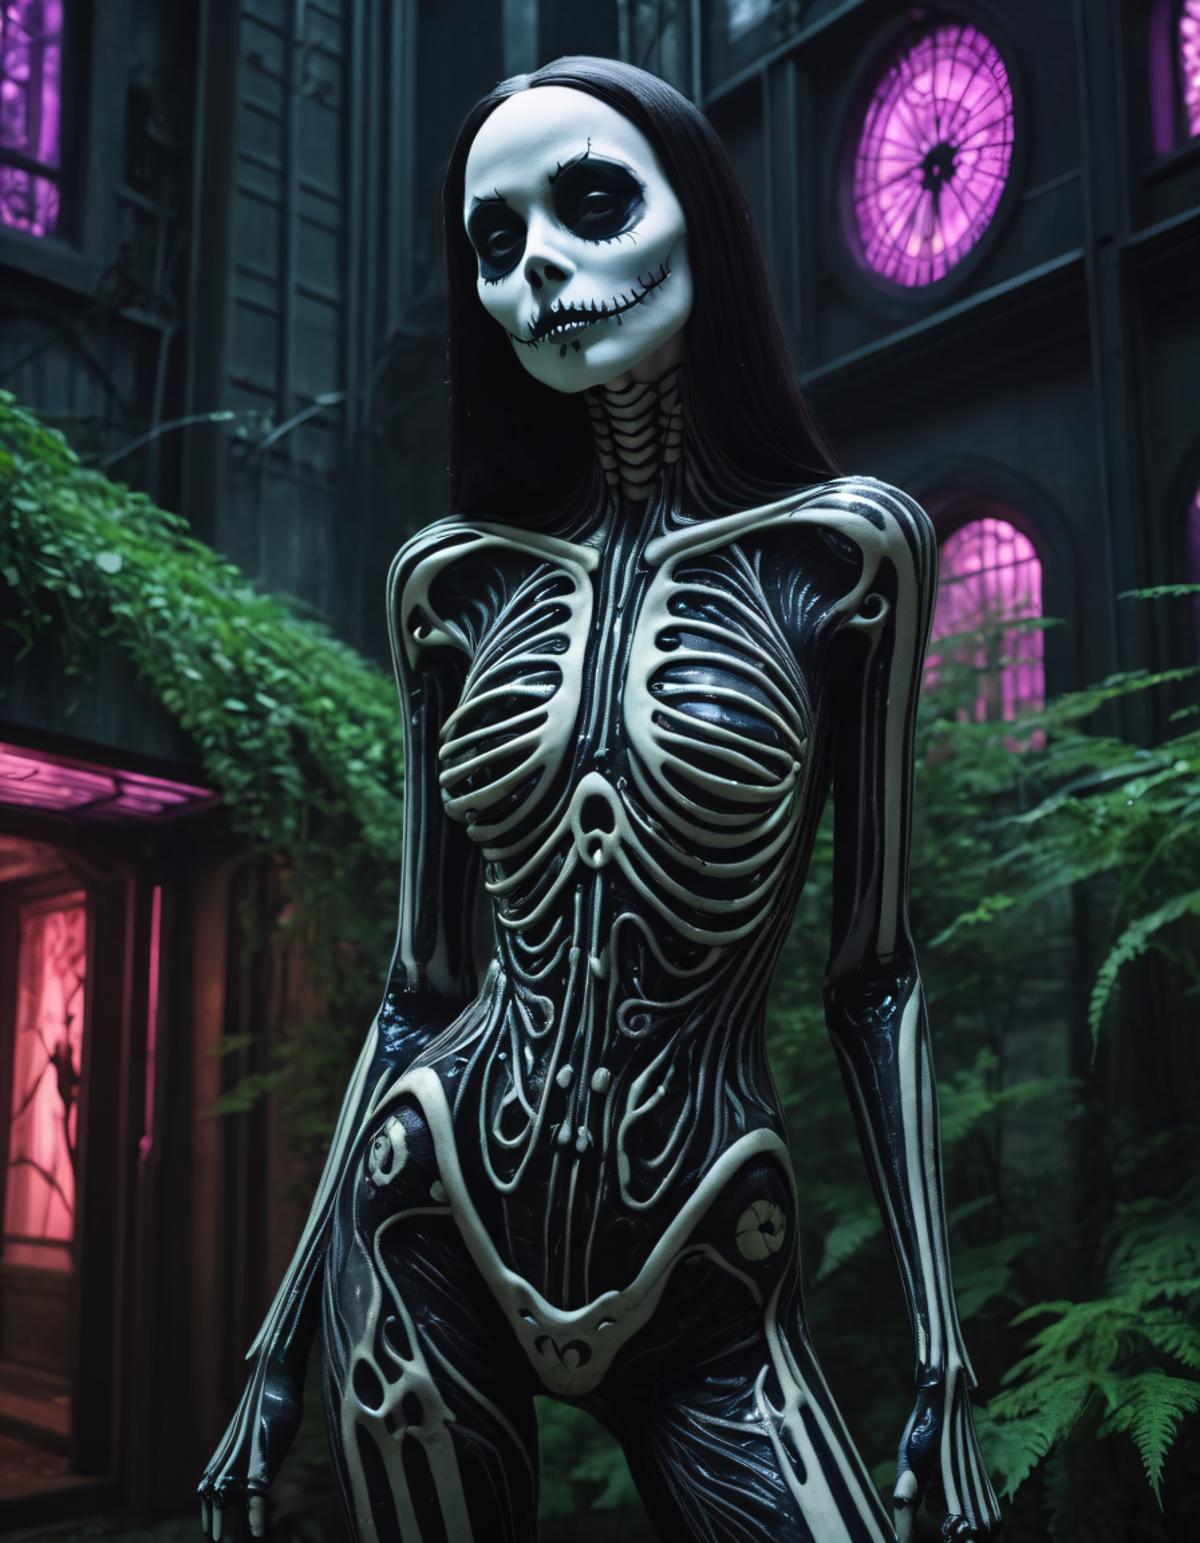 A skeleton woman posing in a dark and eerie setting.